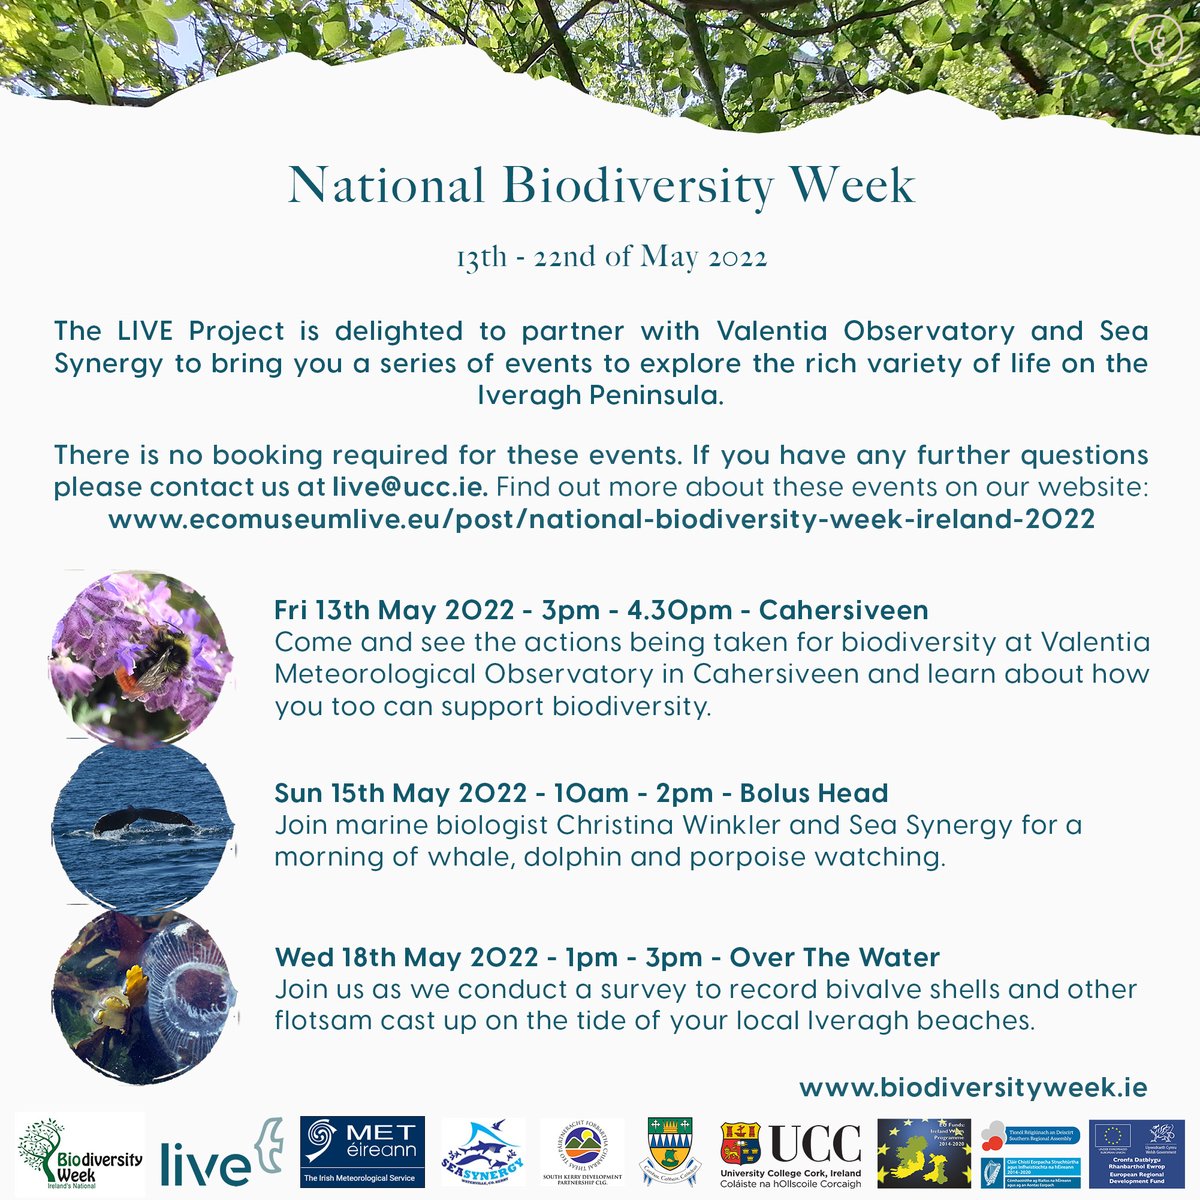 We're really excited for #NationalBiodiversityWeek next week. During the week we have a number of events planned which will highlight the biodiversity we have here in Iveragh. 
#BiodiversityIreland #IrelandsBiodiversity #ValentiaObservatory #TidyTowns #WhaleWatch #EUIrelandWales